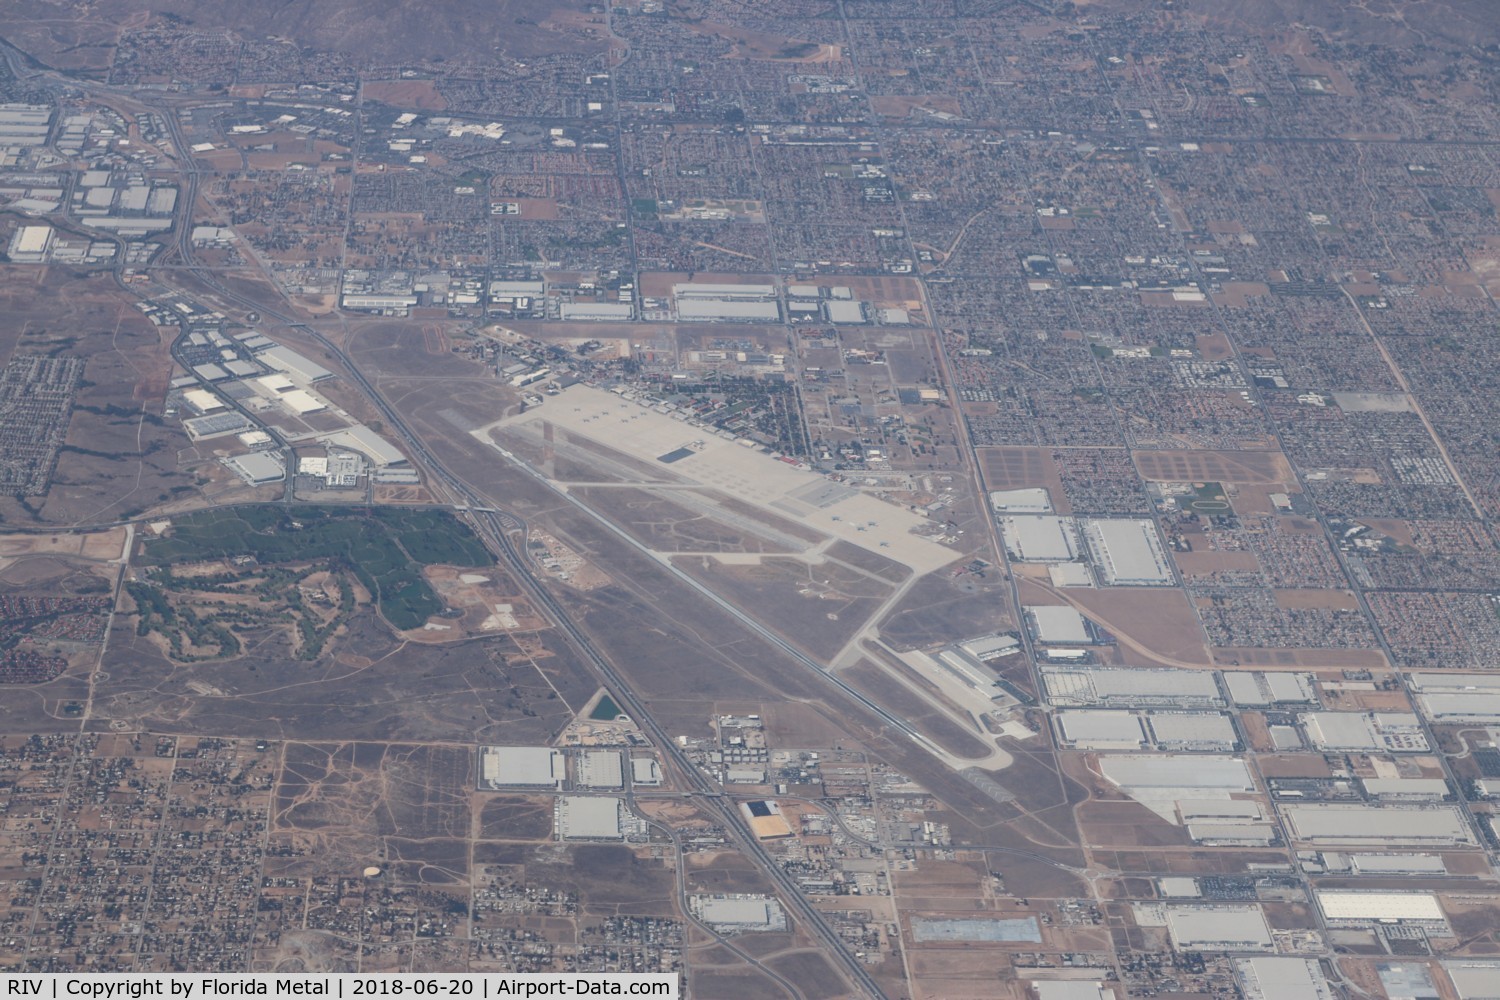 March Arb Airport (RIV) - March AFB